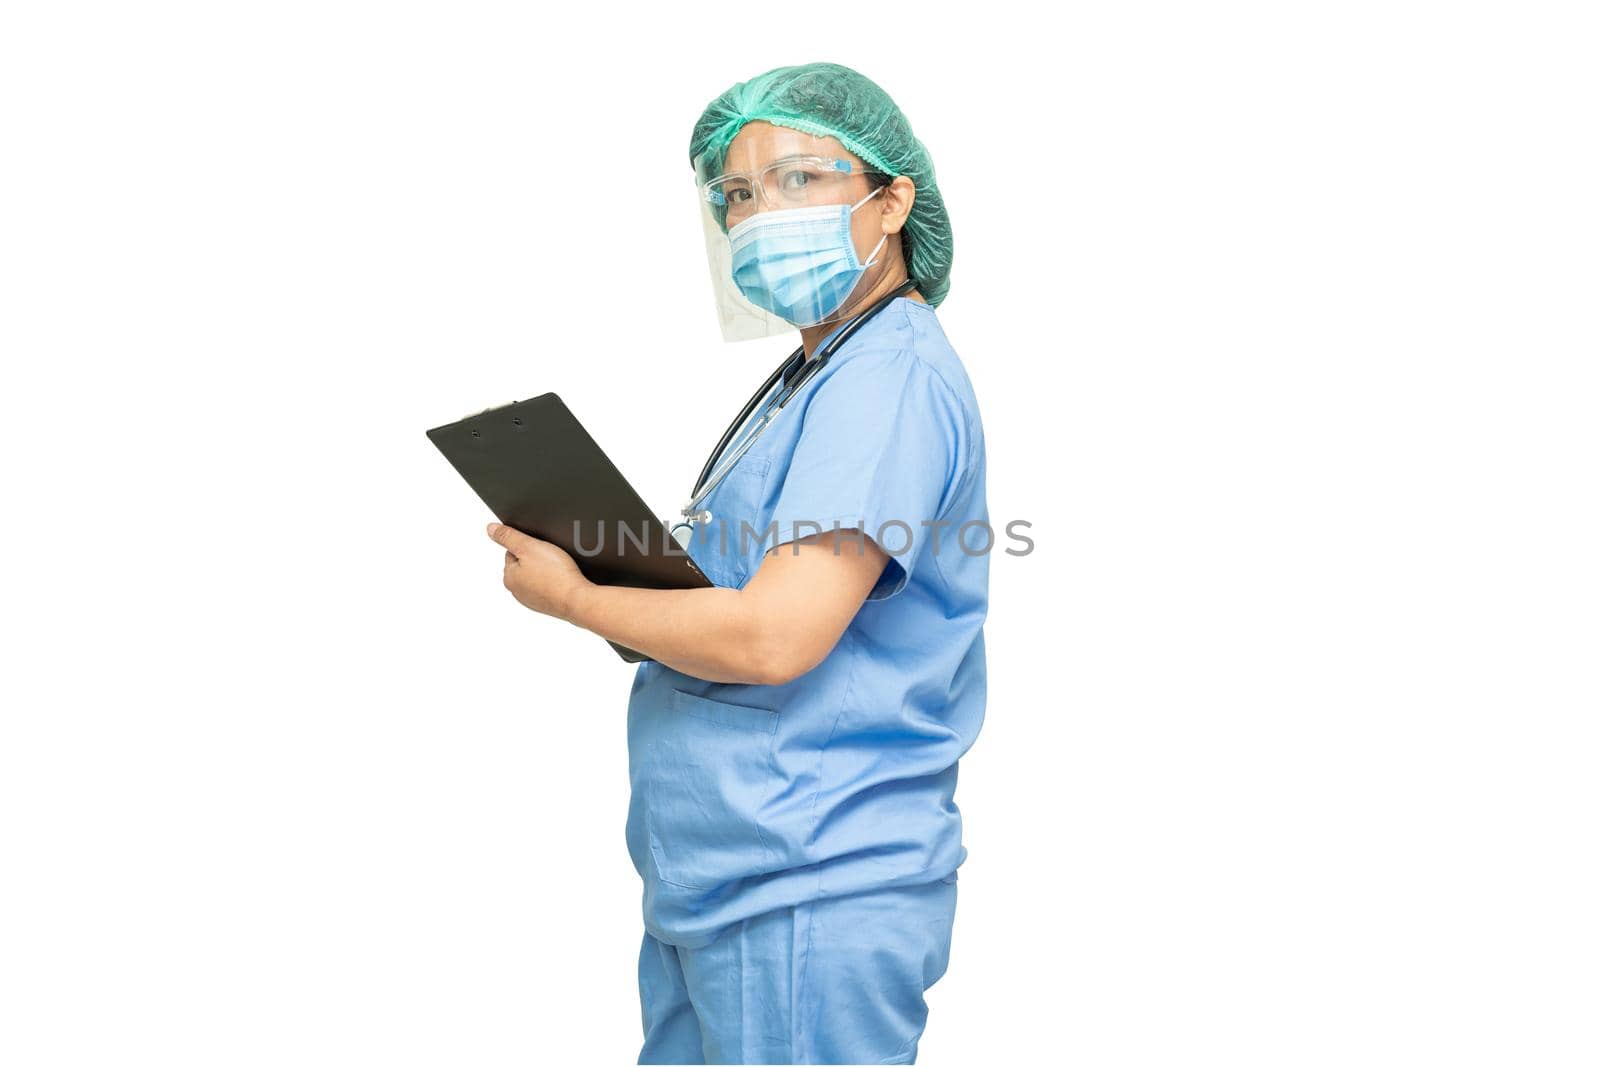 Asian doctor wearing mask, face shield and PPE suit new normal isolated on white background with clipping path to protect safety infection Covid-19 Coronavirus.